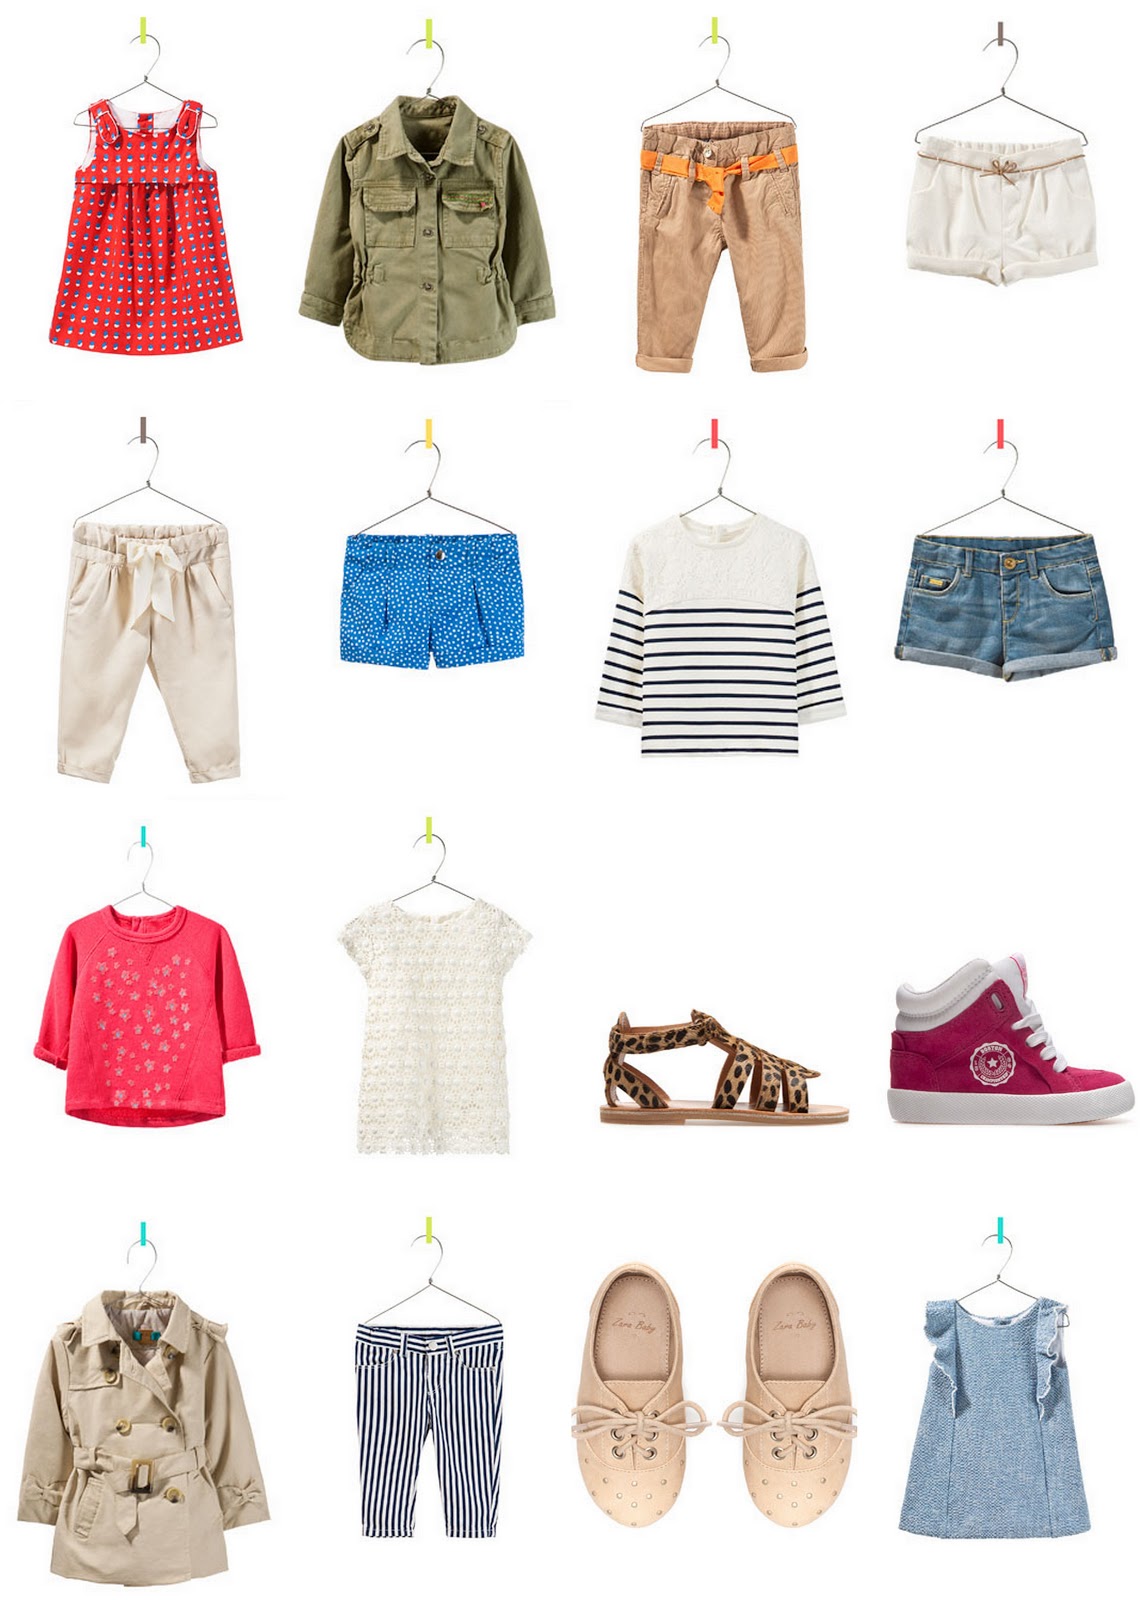 splendid little thrills: Zara Kids- Clothes I'd Like To Squeeze Into